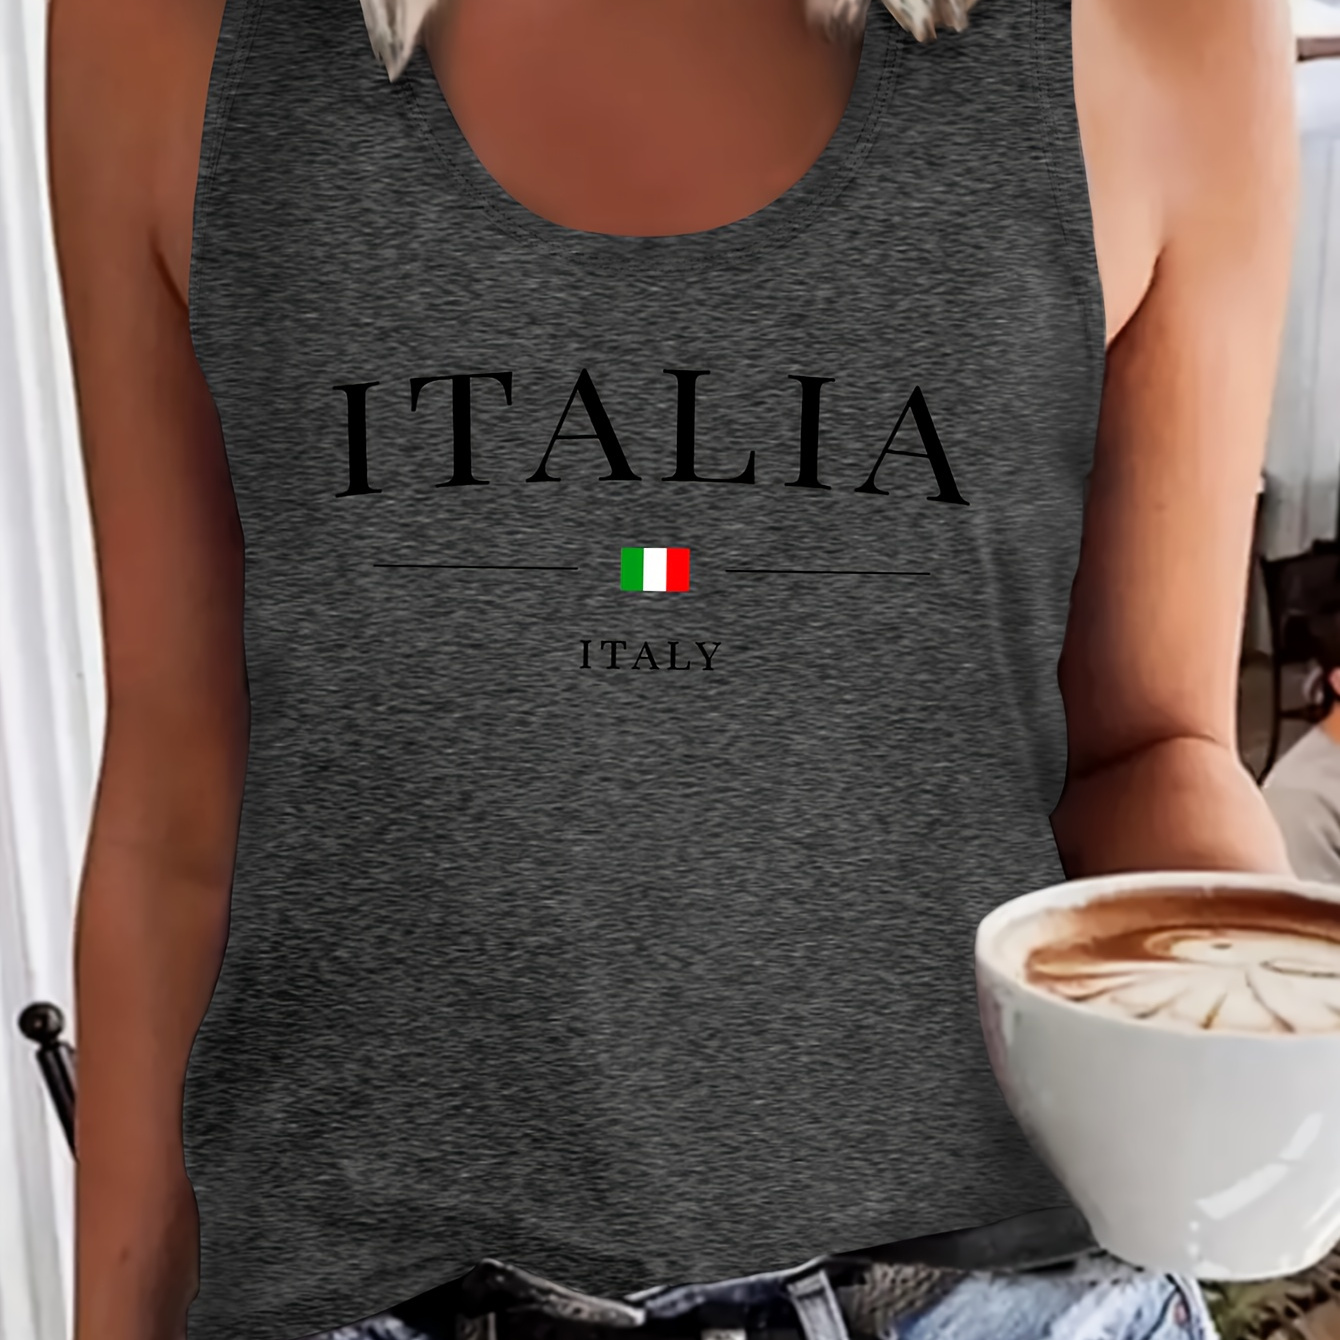 

Italia Print Tank Top, Sleeveless Casual Top For Summer & Spring, Women's Clothing